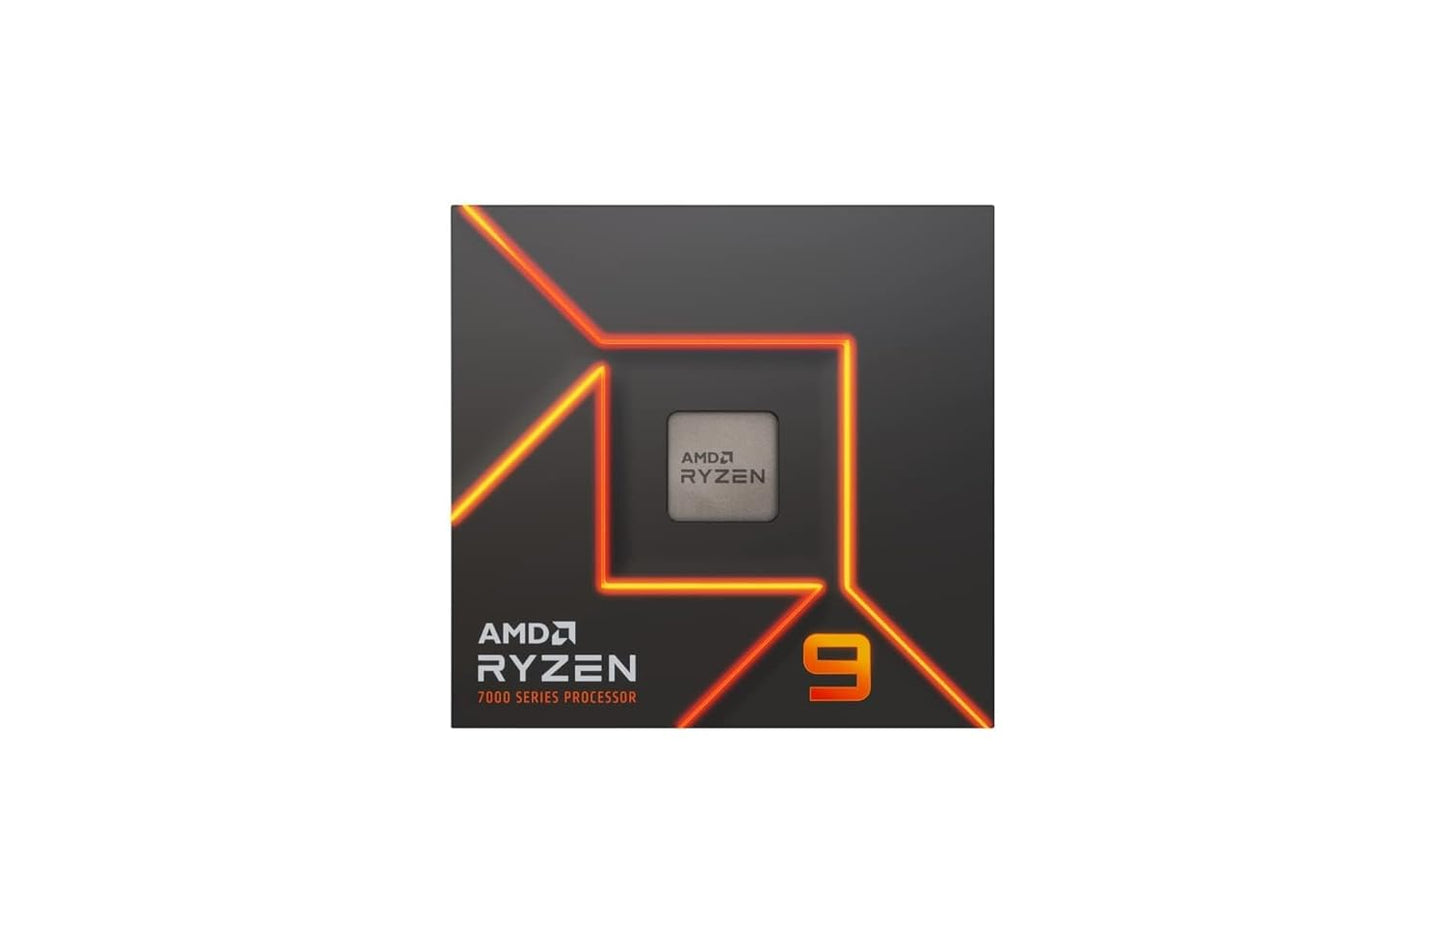 AMD Ryzen 9 7950X Processor With Radeon Graphics, Global Availability, 16 Cores 32 Threads, Base Clock 4.5GHz, Max Boost Clock 5.7GHz, Unlocked for Overclocking, AM5 CPU Socket